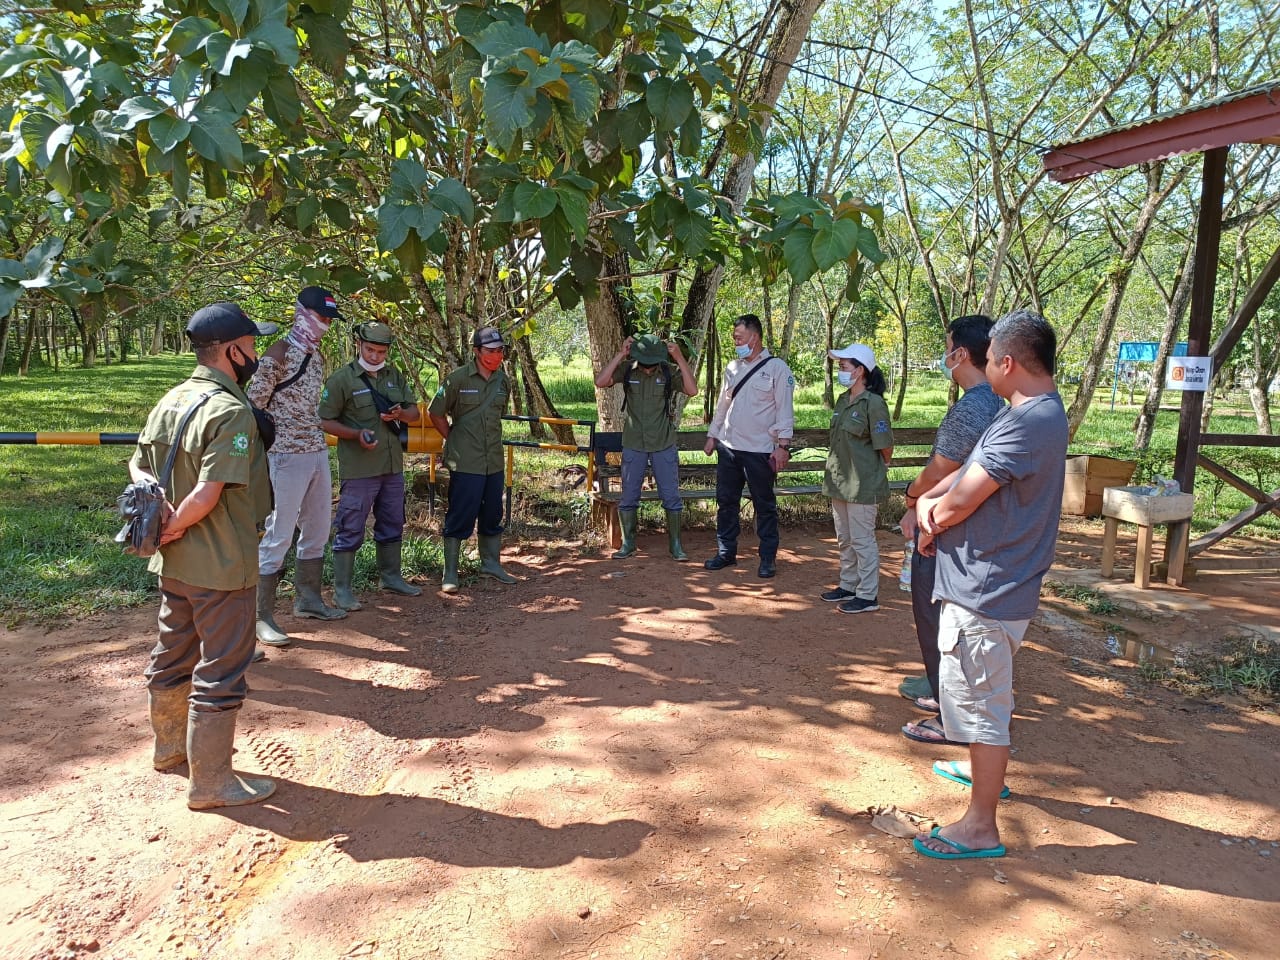 Image: Sopiana Angel and the forest patrol team preparing for a conservation activity at Mabali Estate.